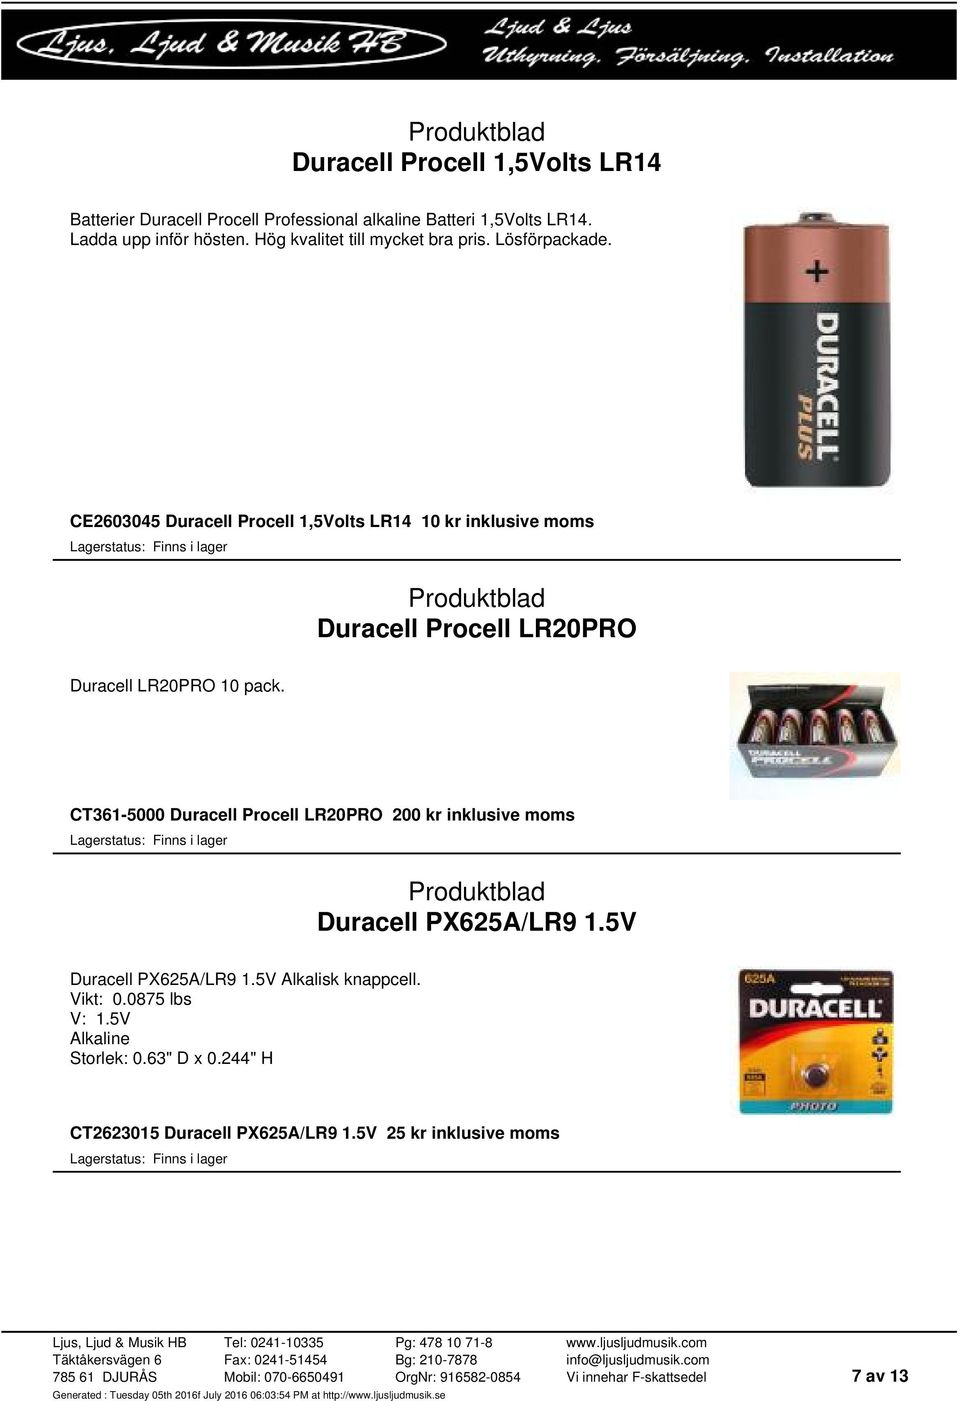 CE2603045 Duracell Procell 1,5Volts LR14 10 kr inklusive moms Duracell Procell LR20PRO Duracell LR20PRO 10 pack.